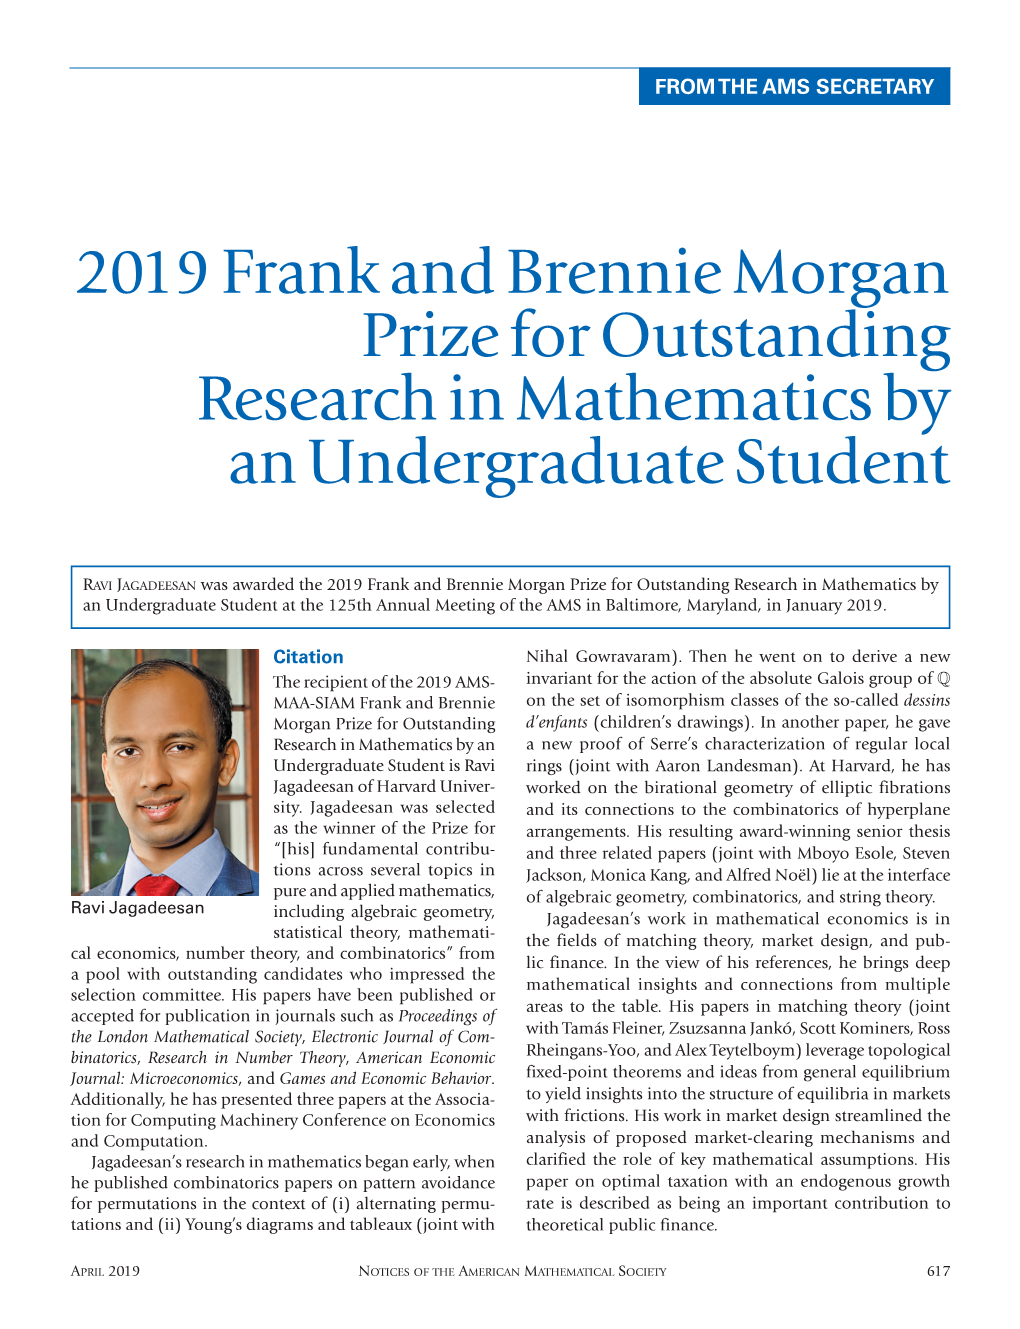 Frank and Brennie Morgan Prize for Outstanding Research by An